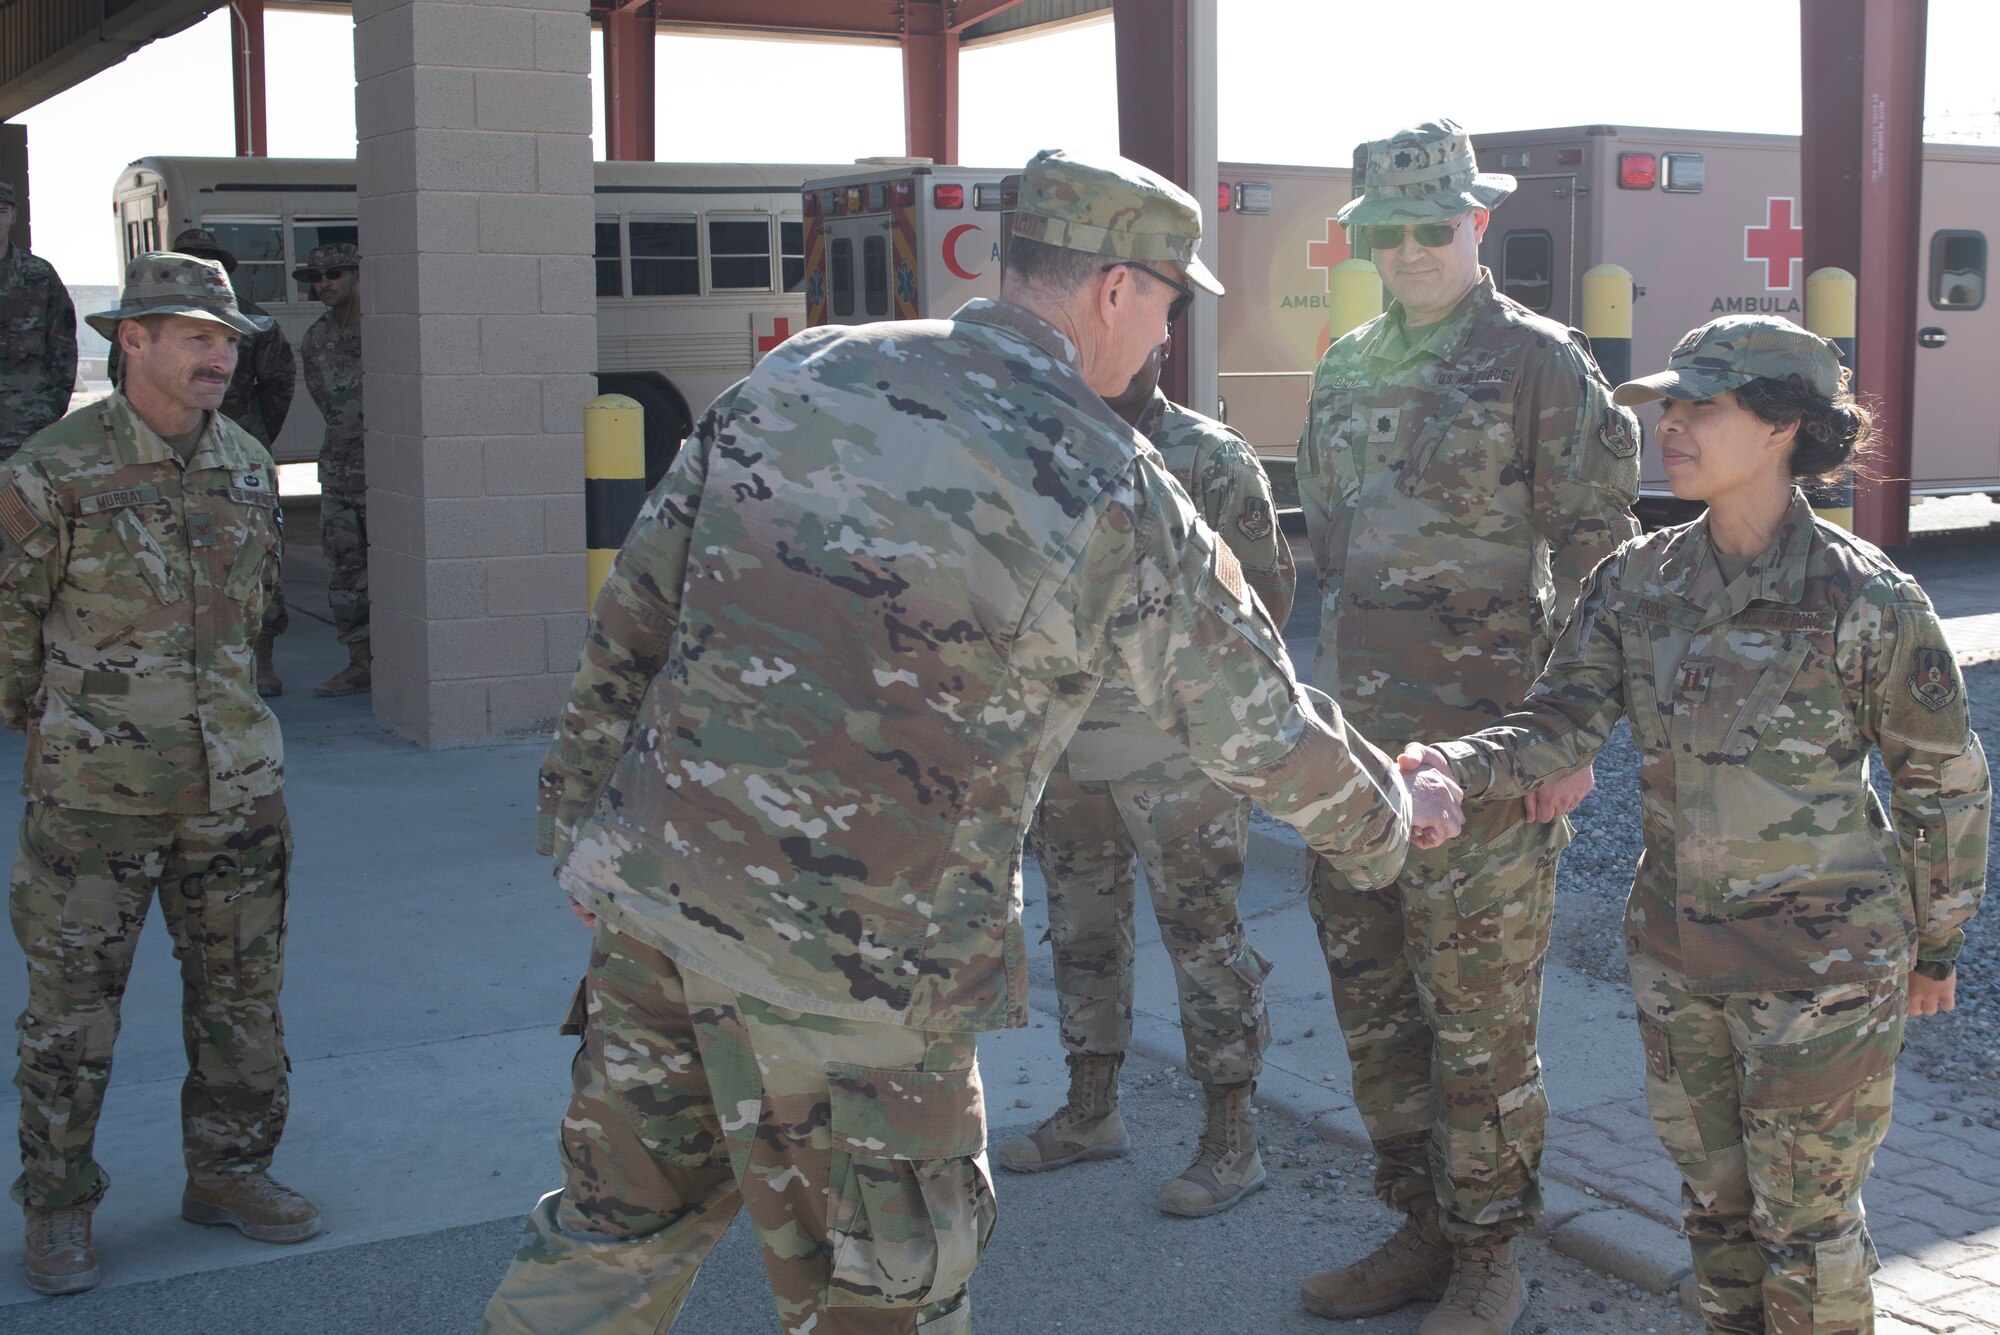 An Airman shakes another Airman's hand.